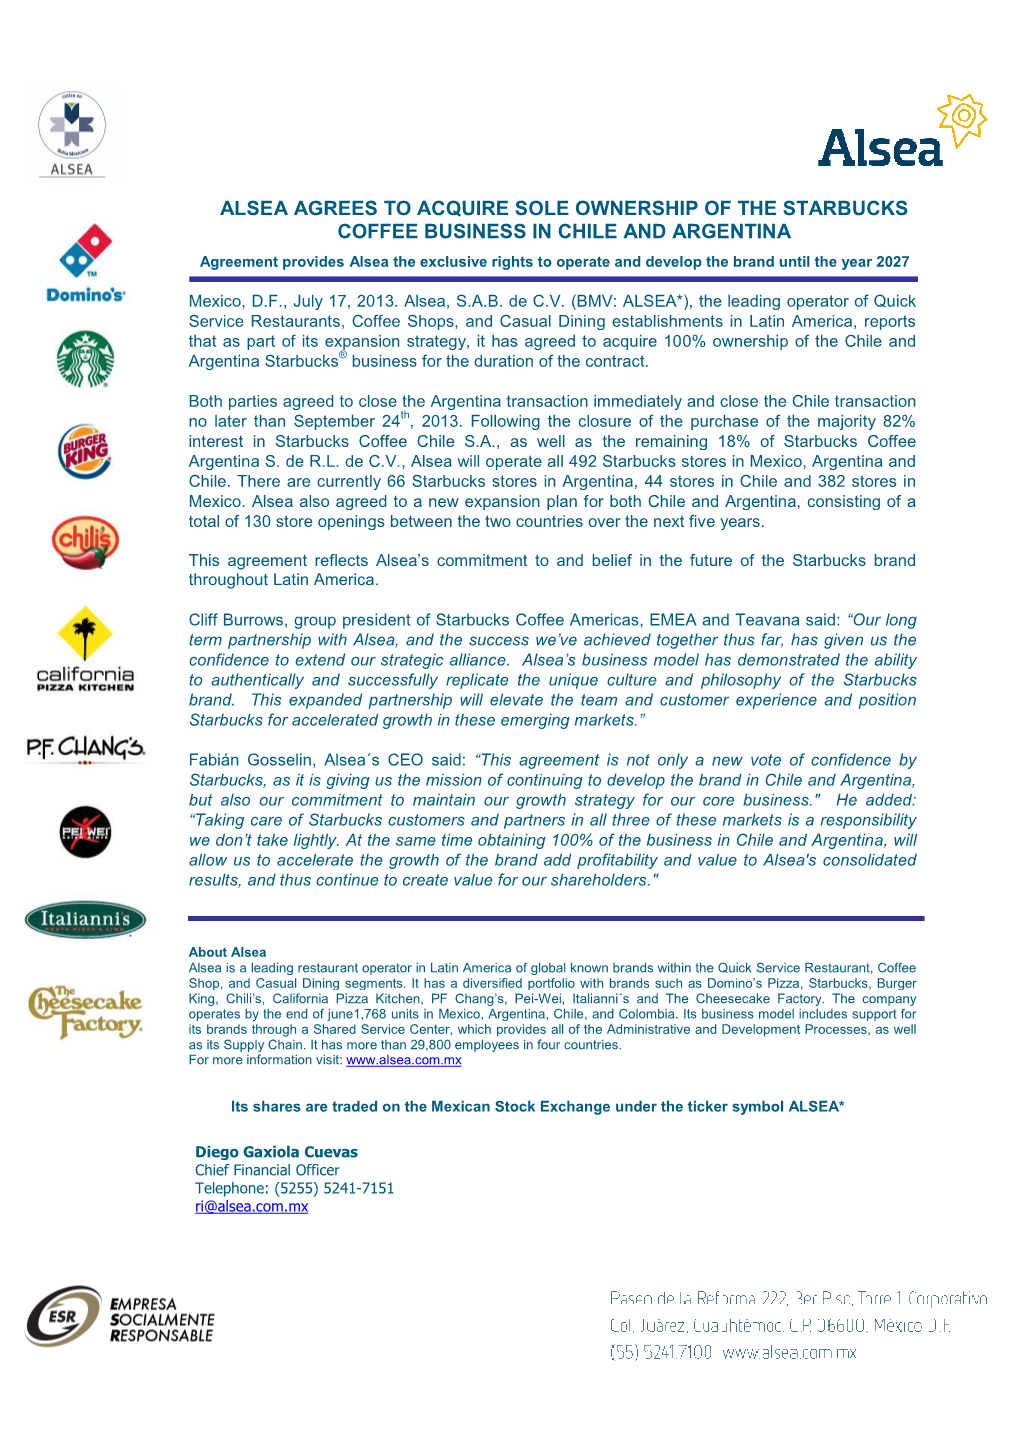 Acquisition of Cafe Sirena Chile and Argentina